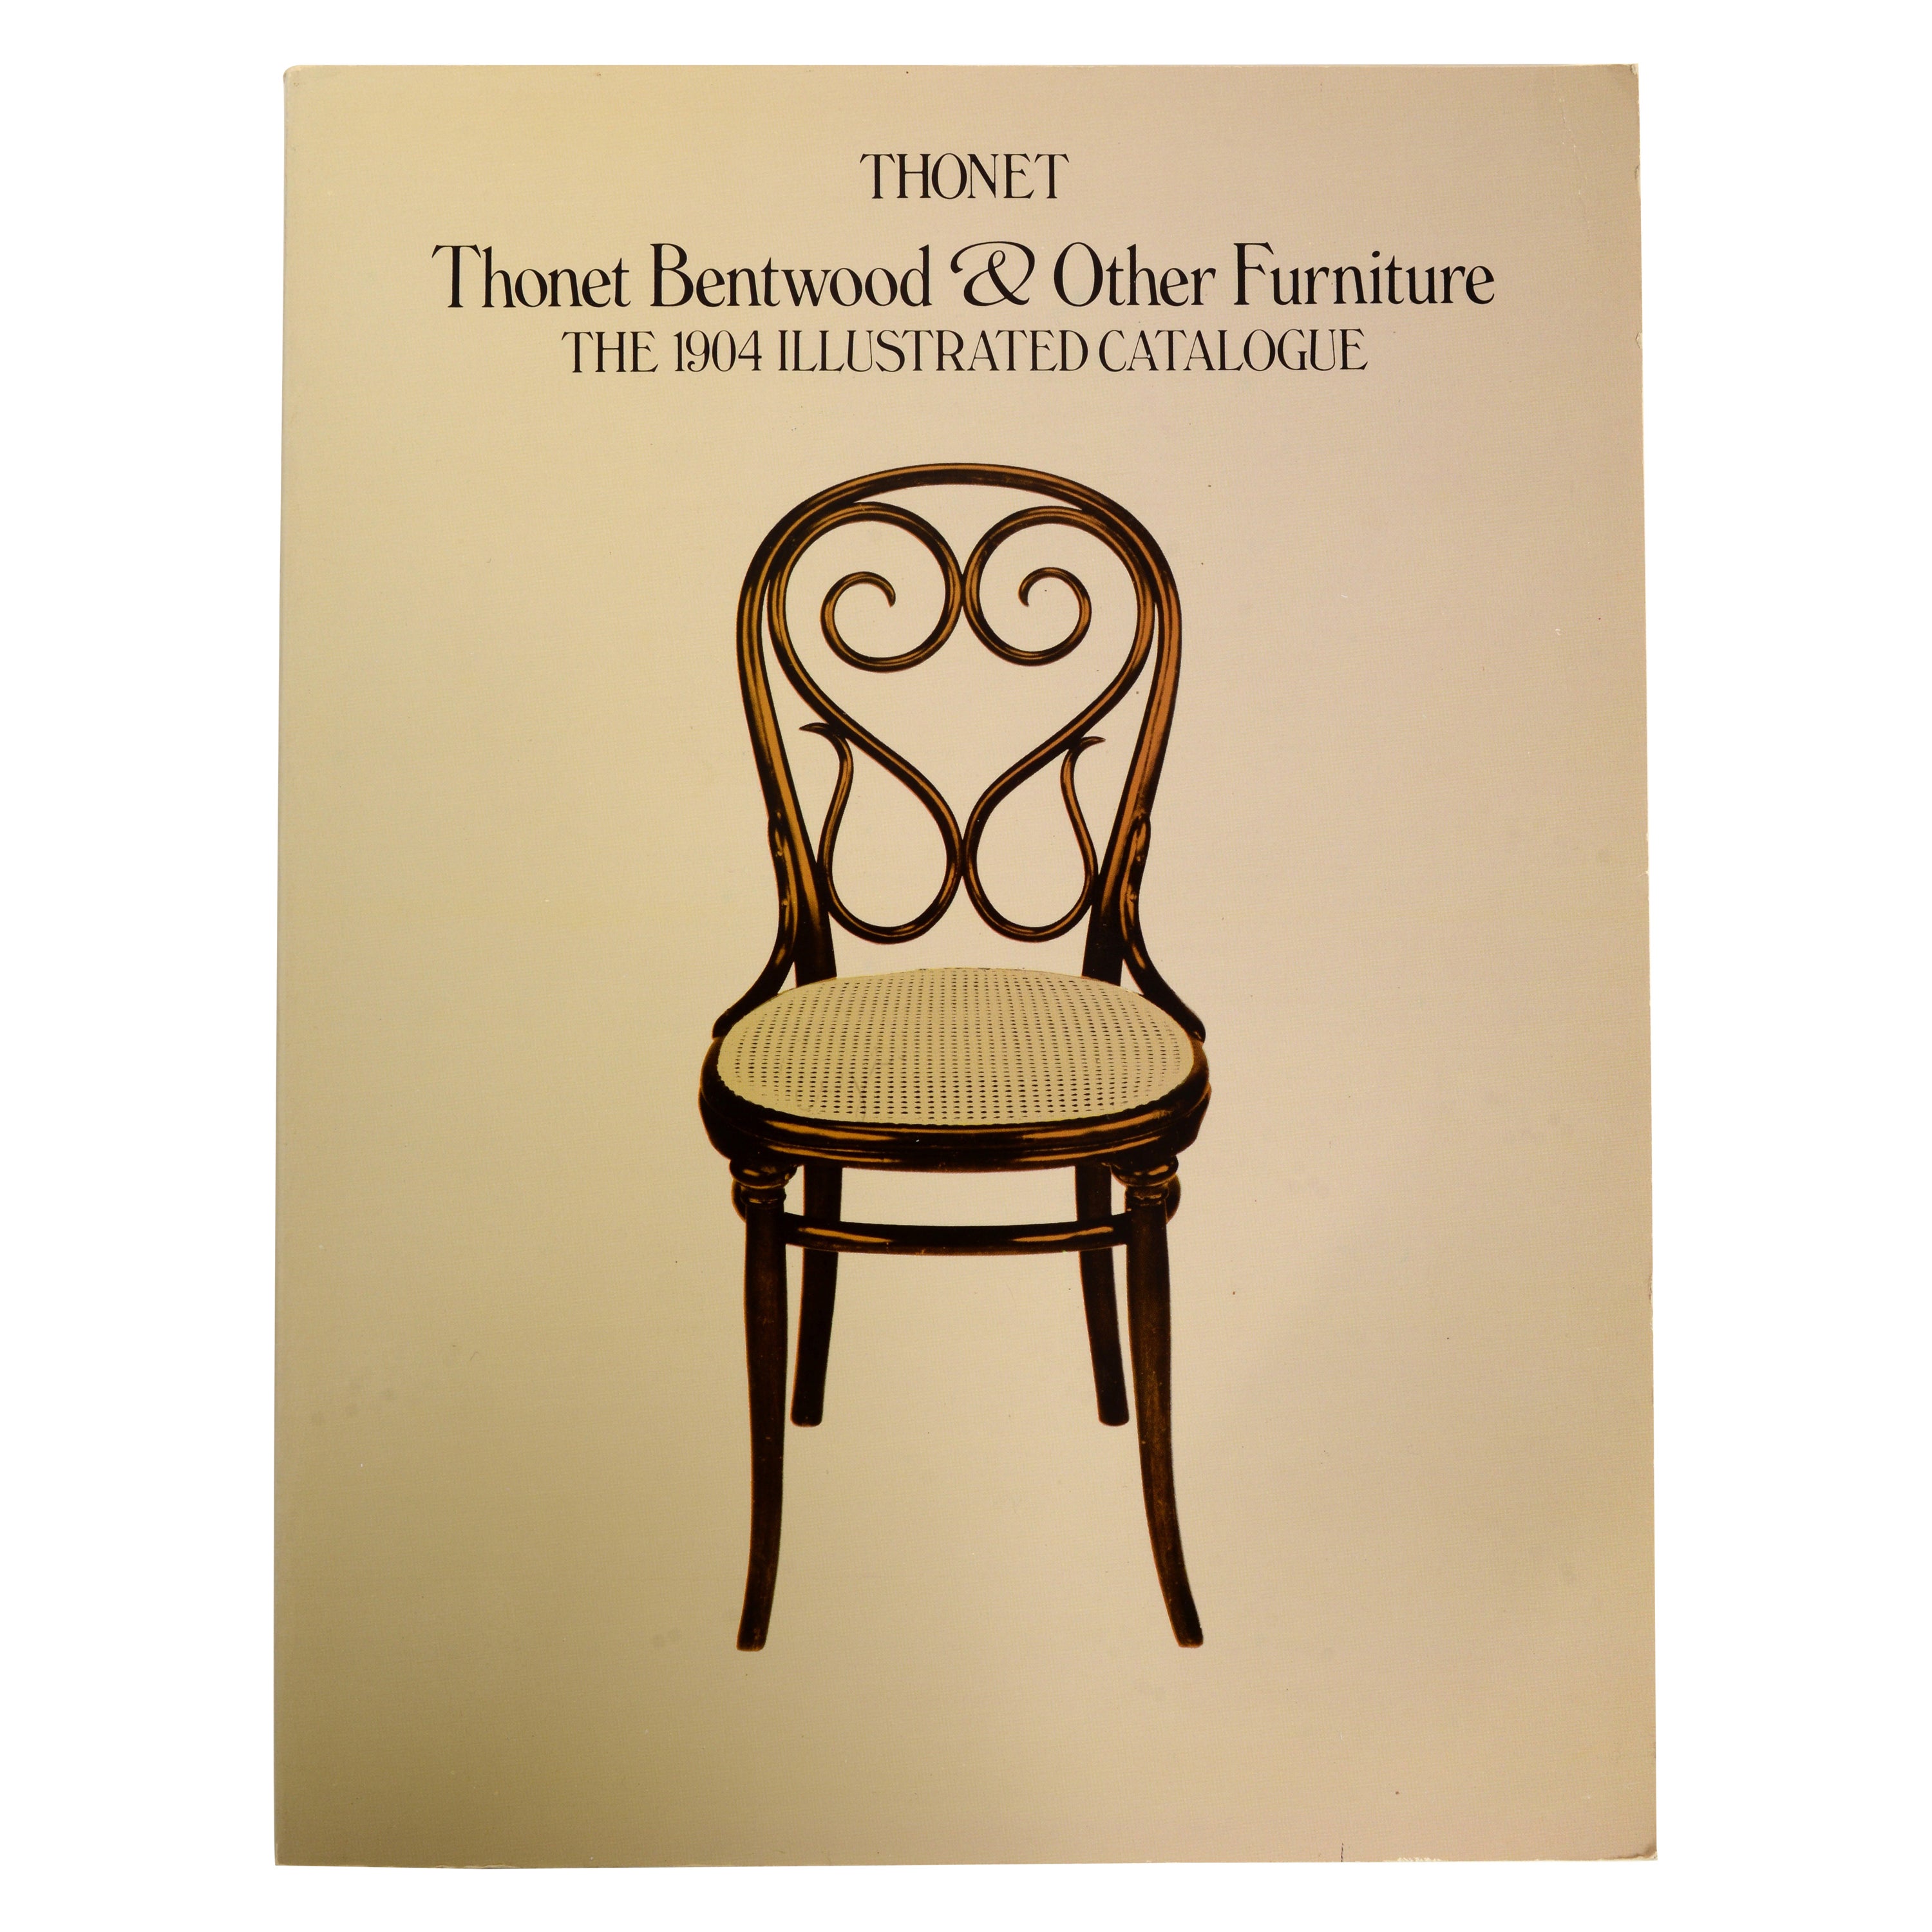 Thonet Bentwood & Other Furniture : The 1904 Illustrated Catalogue